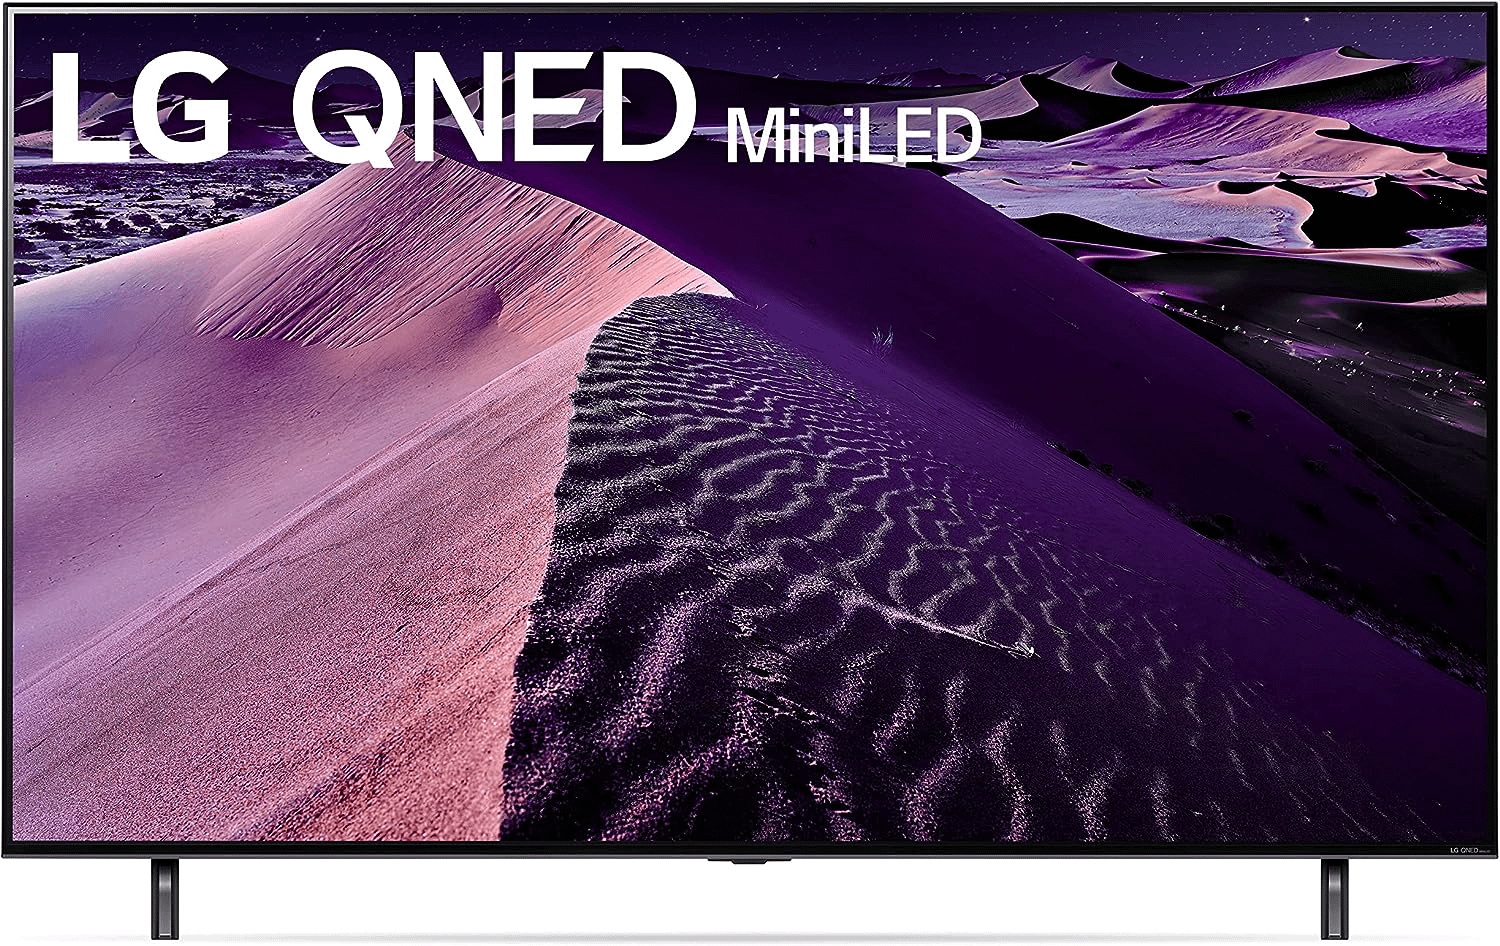 Black Friday TV Deals - LG QNED85 Series 65-Inch Class QNED Mini-LED Smart TV